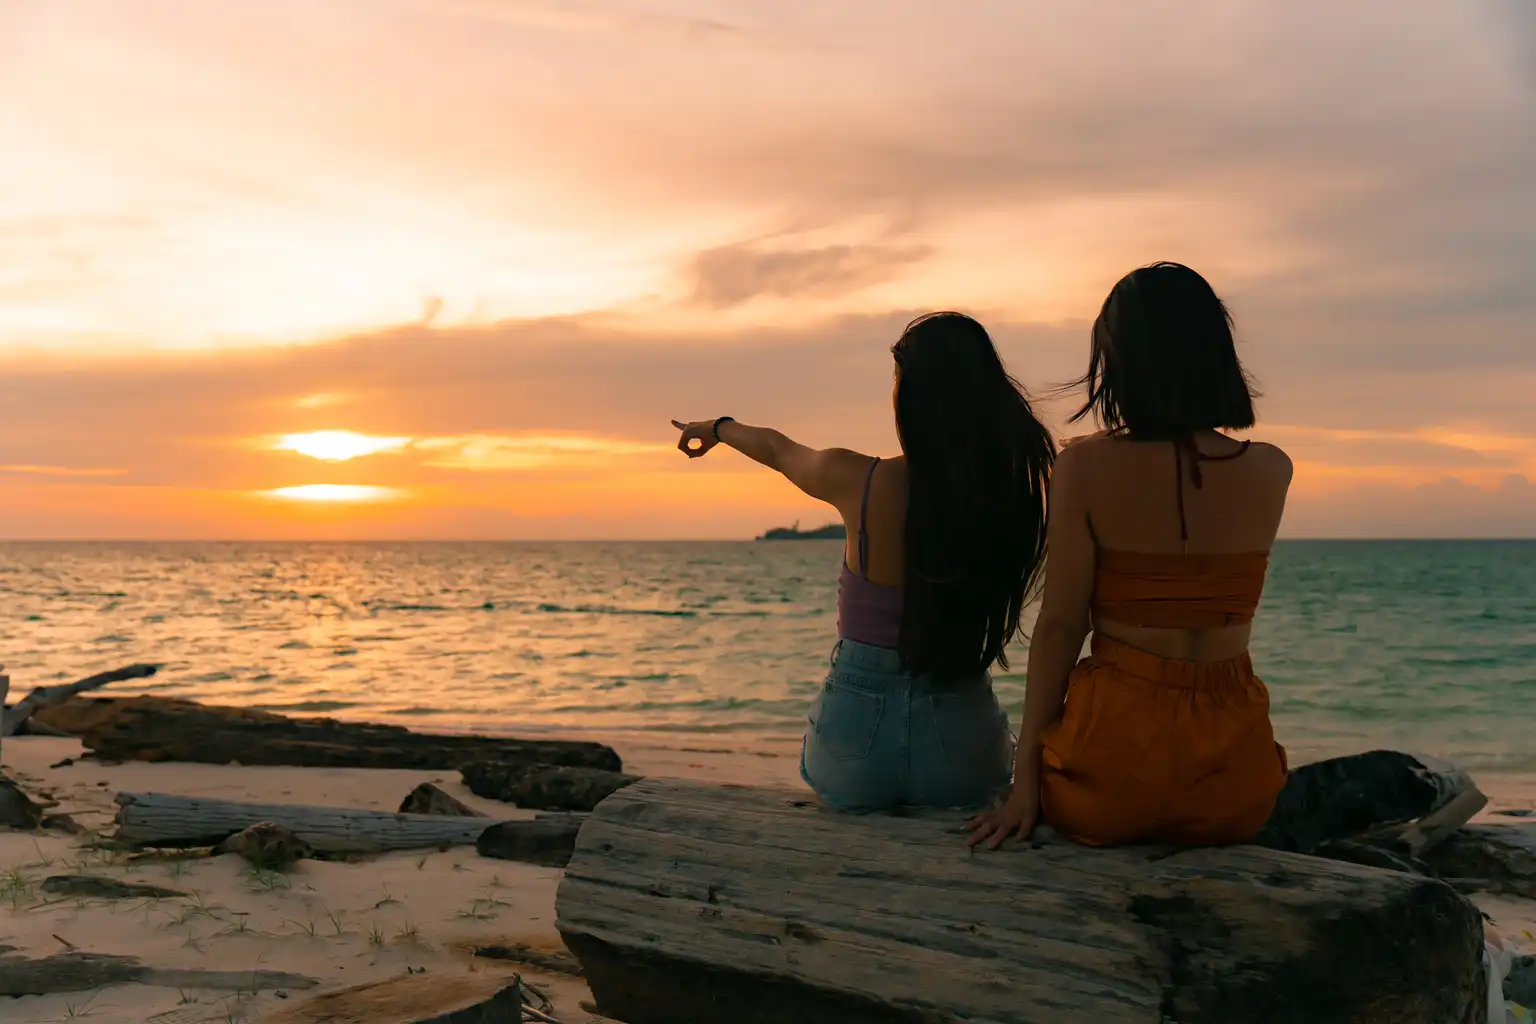 Two women sitting on a log at the beach, pointing at a sunset over the ocean.